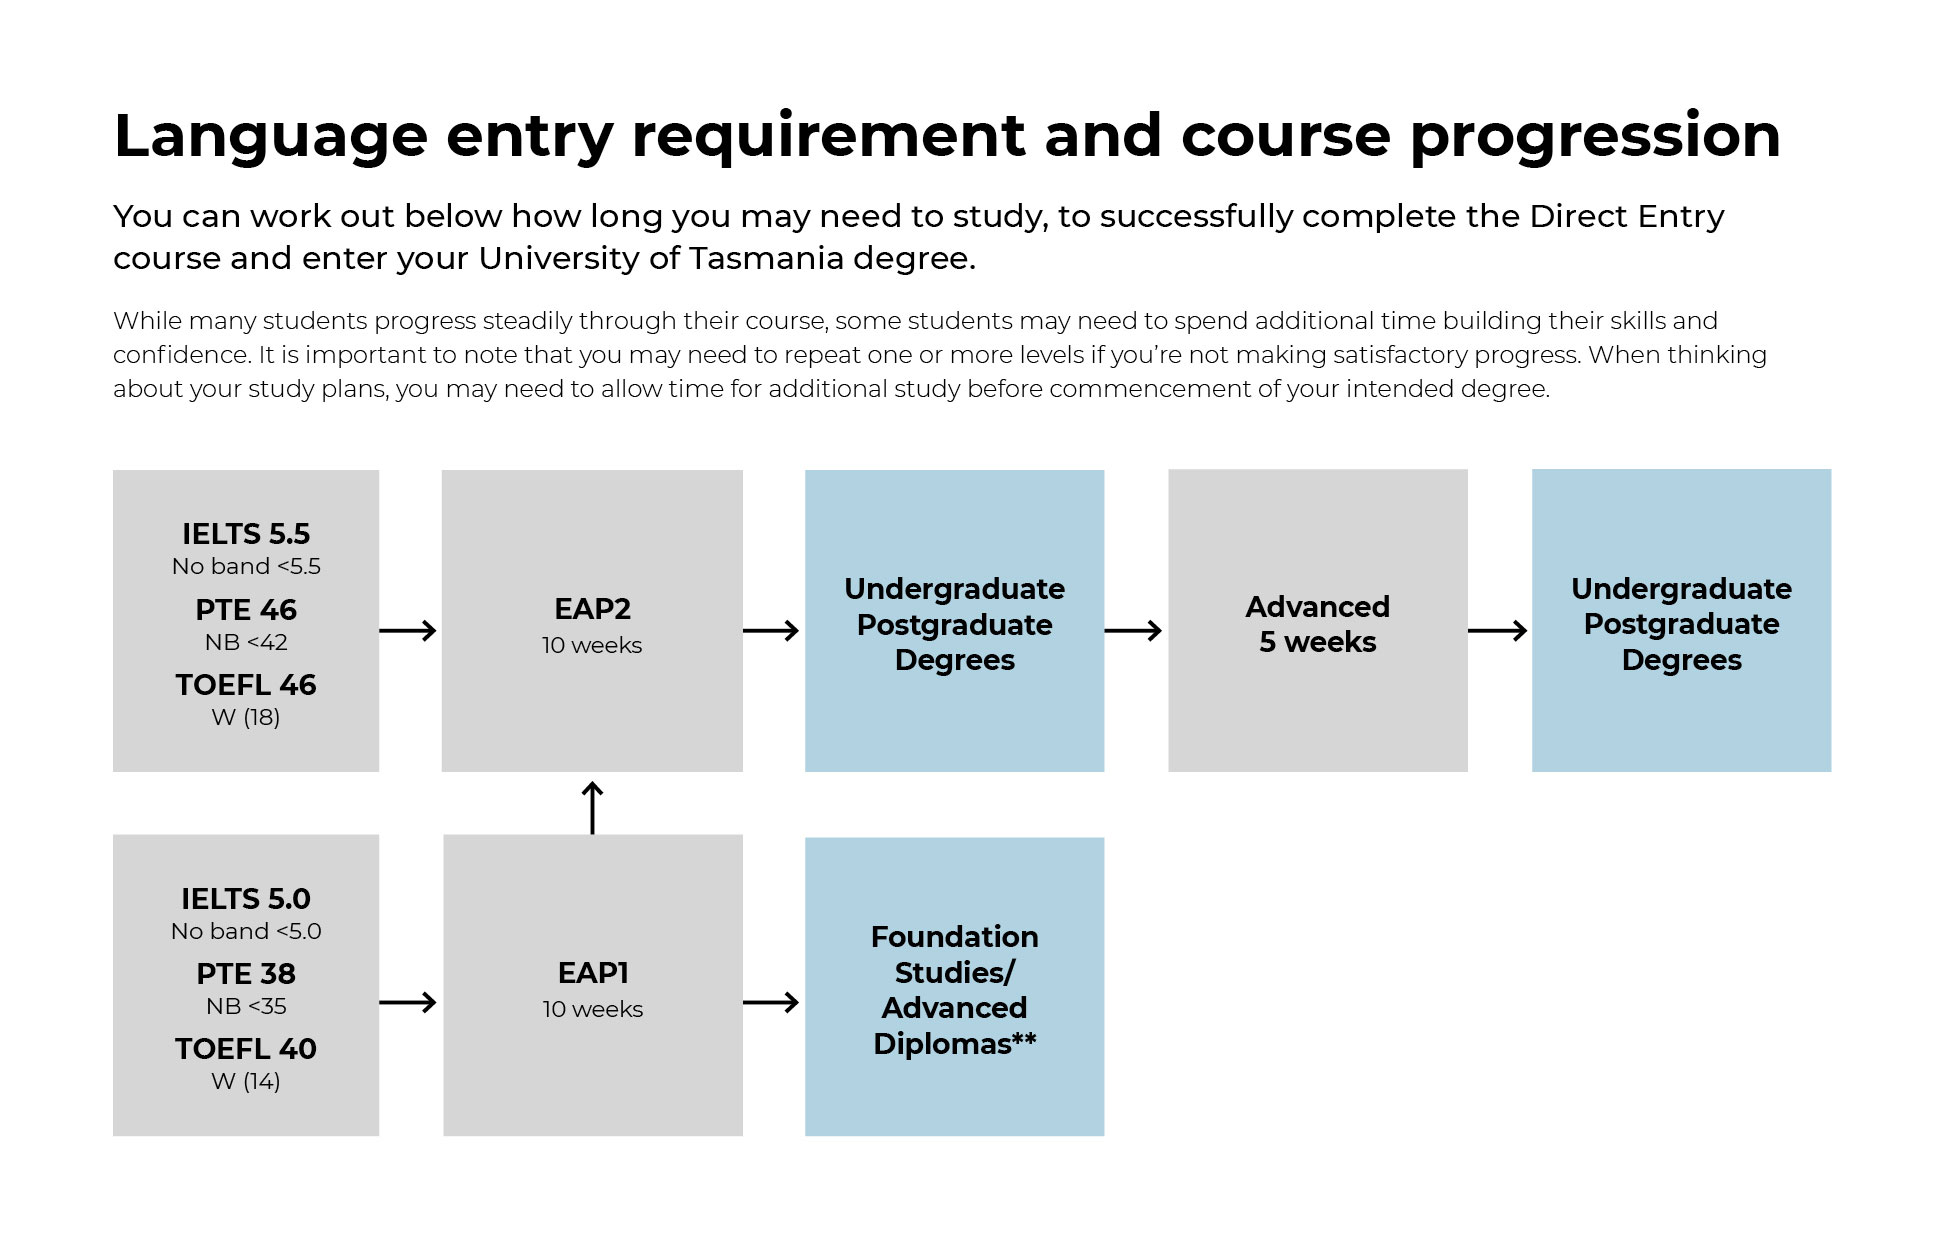 Language entry requirement and course progression flowchart